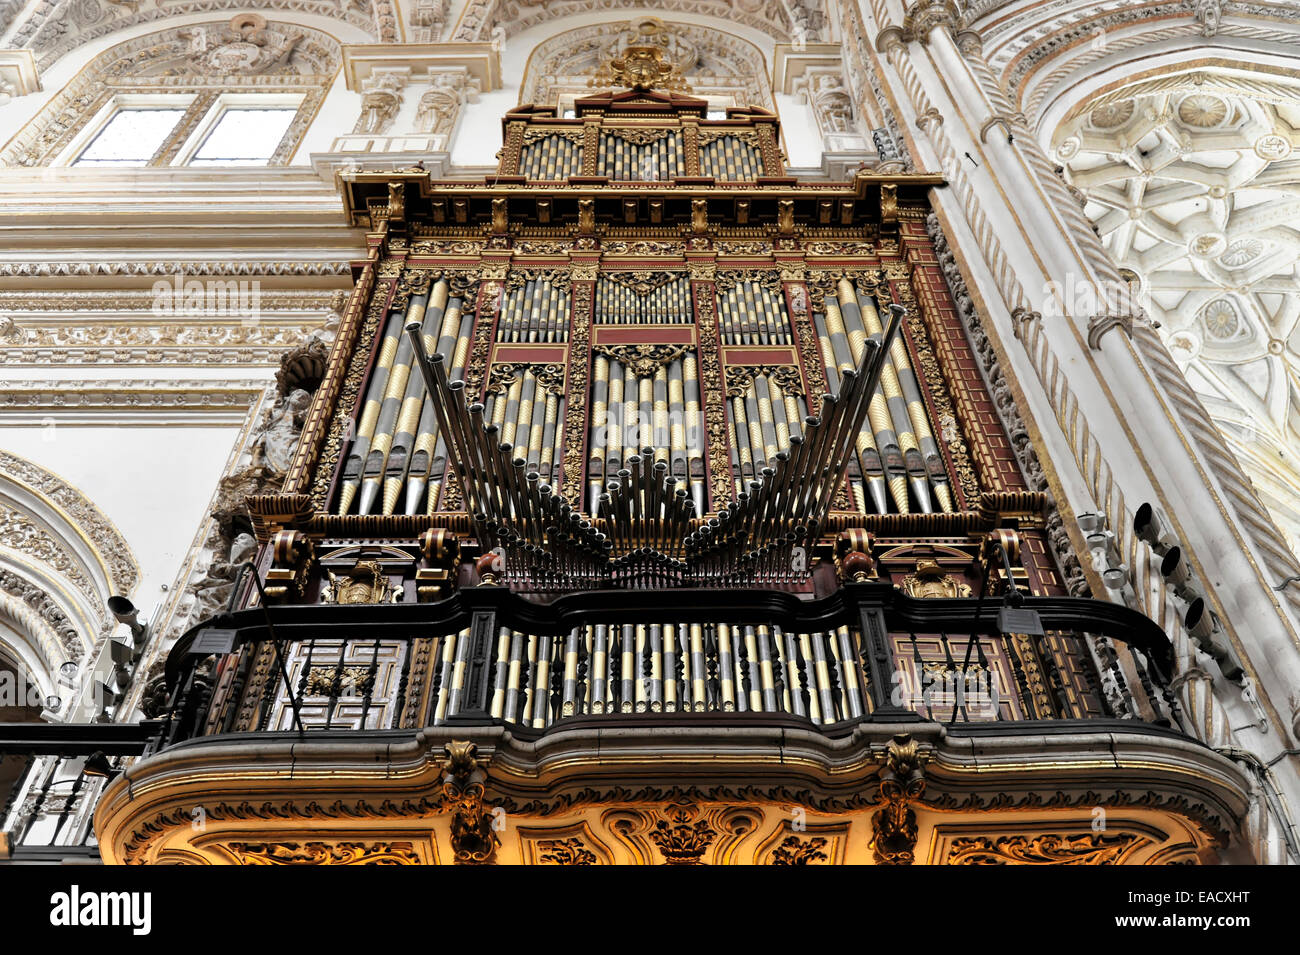 Organ, Mezquita or Great Mosque of Córdoba, former mosque, now a cathedral, Córdoba, Córdoba province, Andalusia, Spain Stock Photo